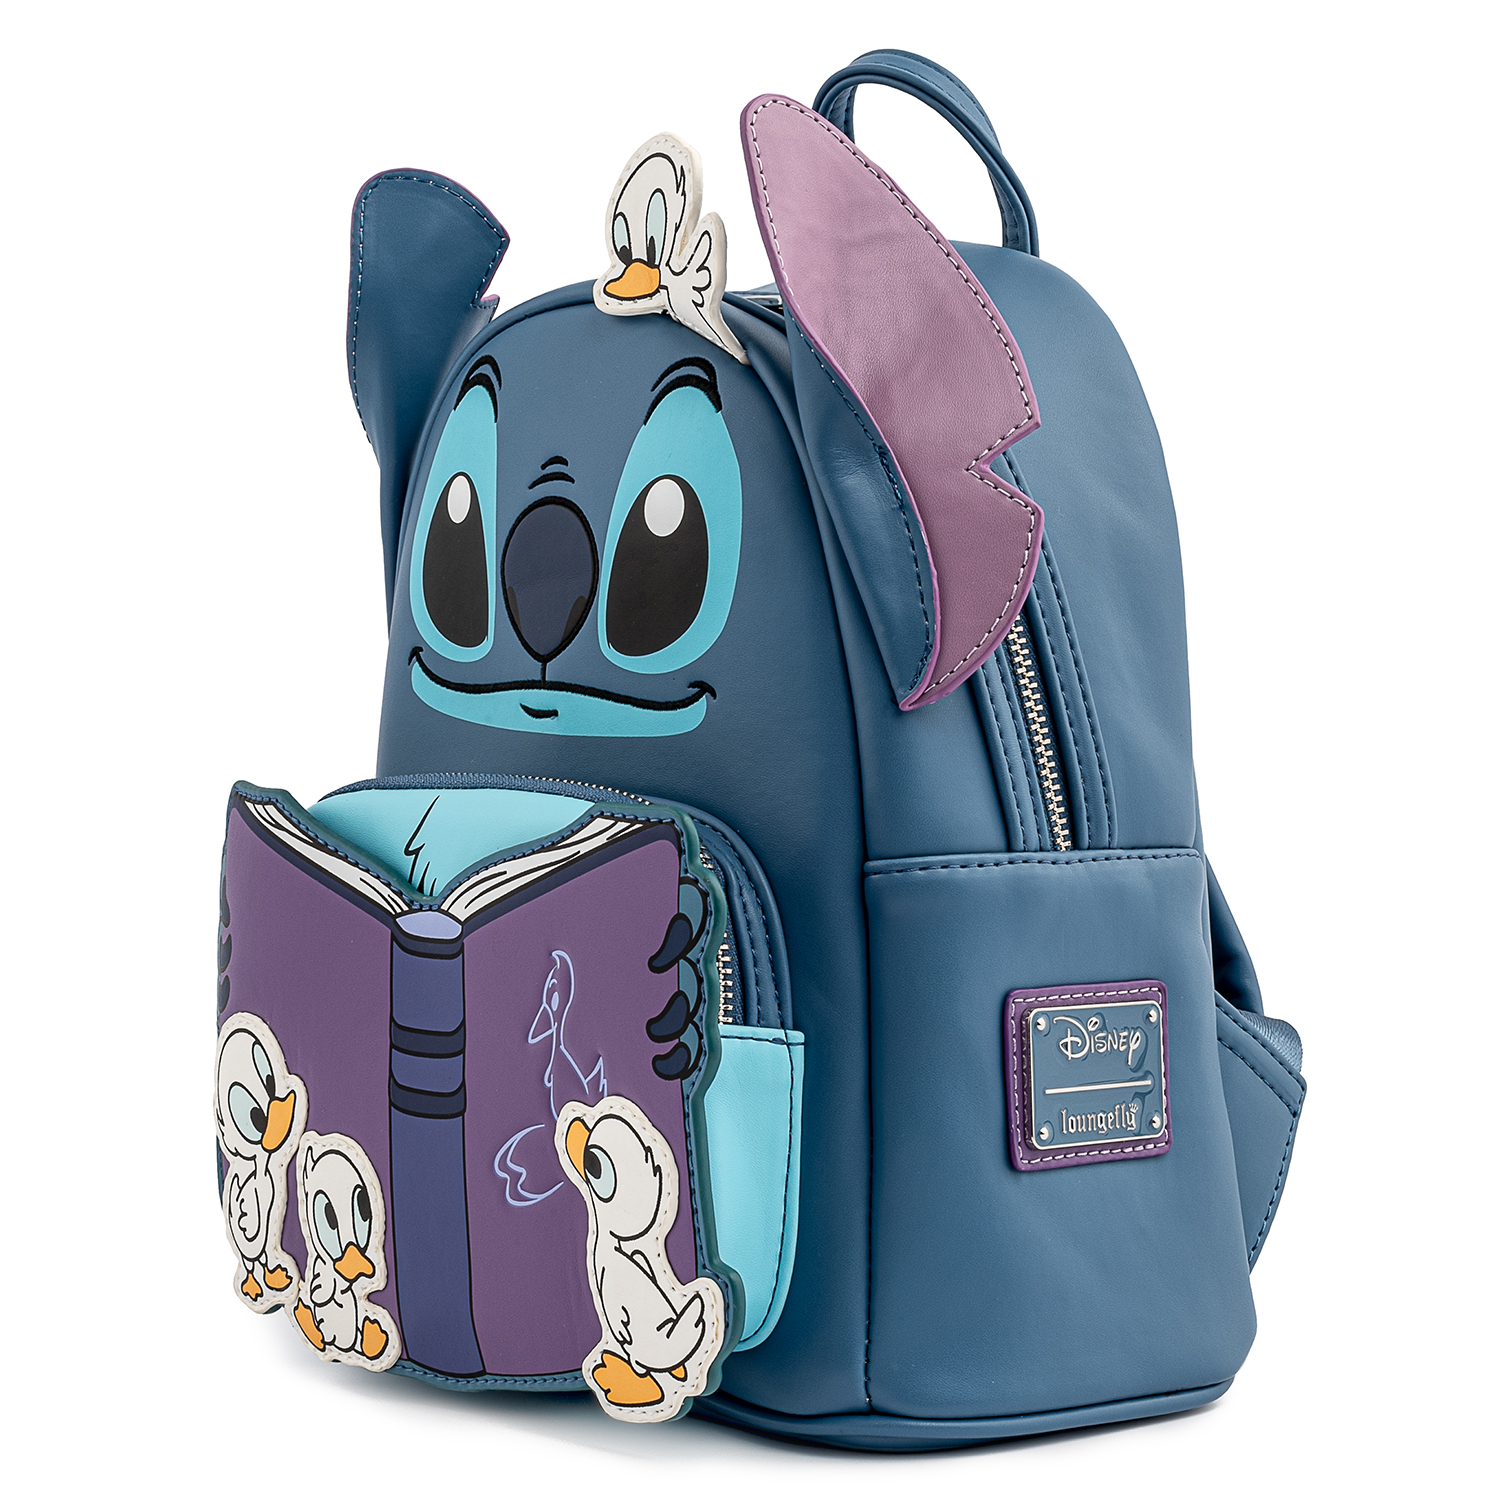 Stitch and Ducks Loungefly Mini Backpack